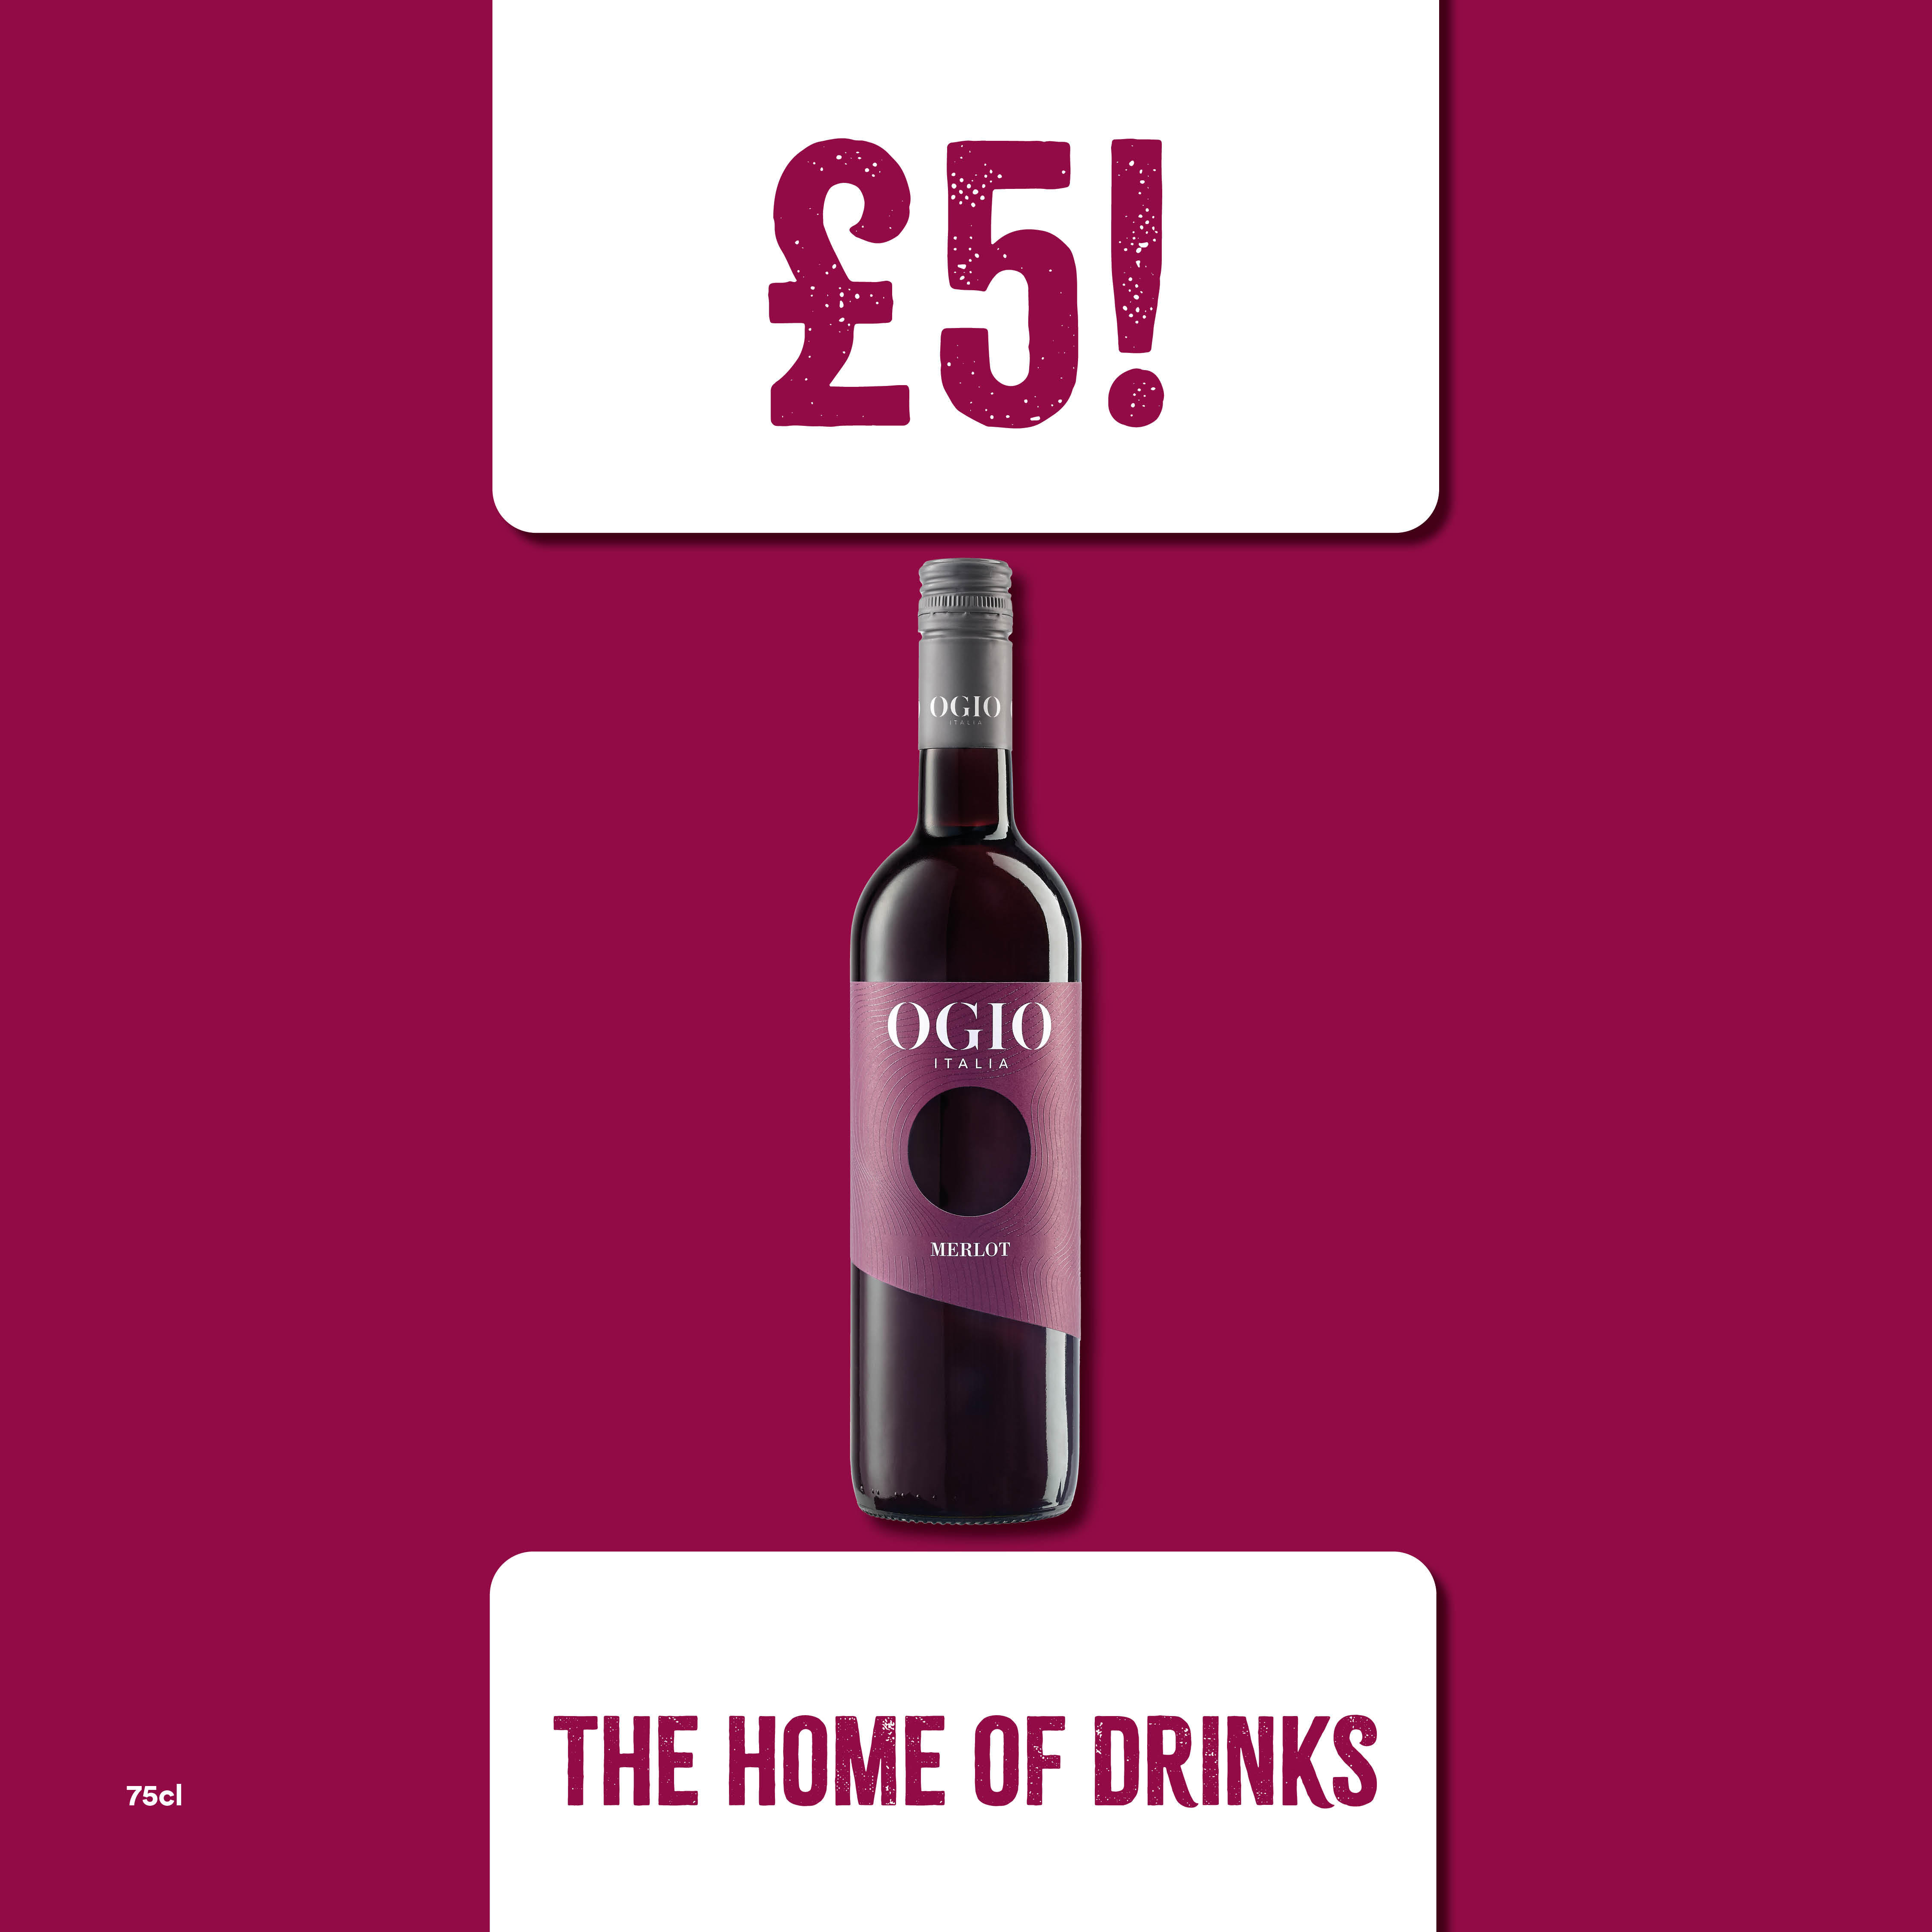 Only £5 on Ogio Merlot Bargain Booze Select Convenience Leicester 01162 302553